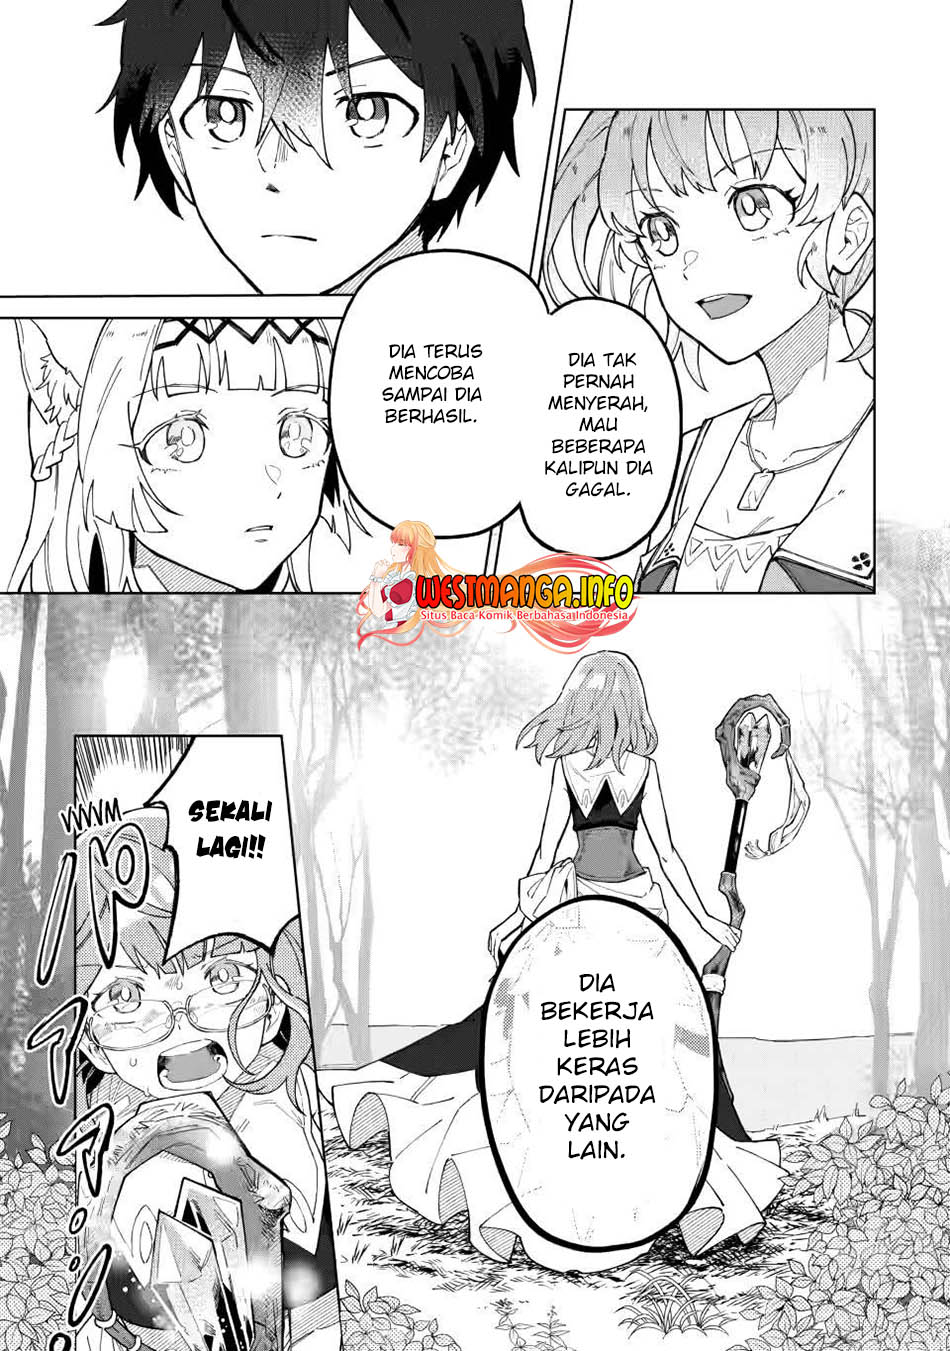 KomiknThe White Mage Who Was Banished From the Hero’s Party Is Picked up by an S Rank Adventurer ~ This White Mage Is Too Out of the Ordinary! Chapter 13